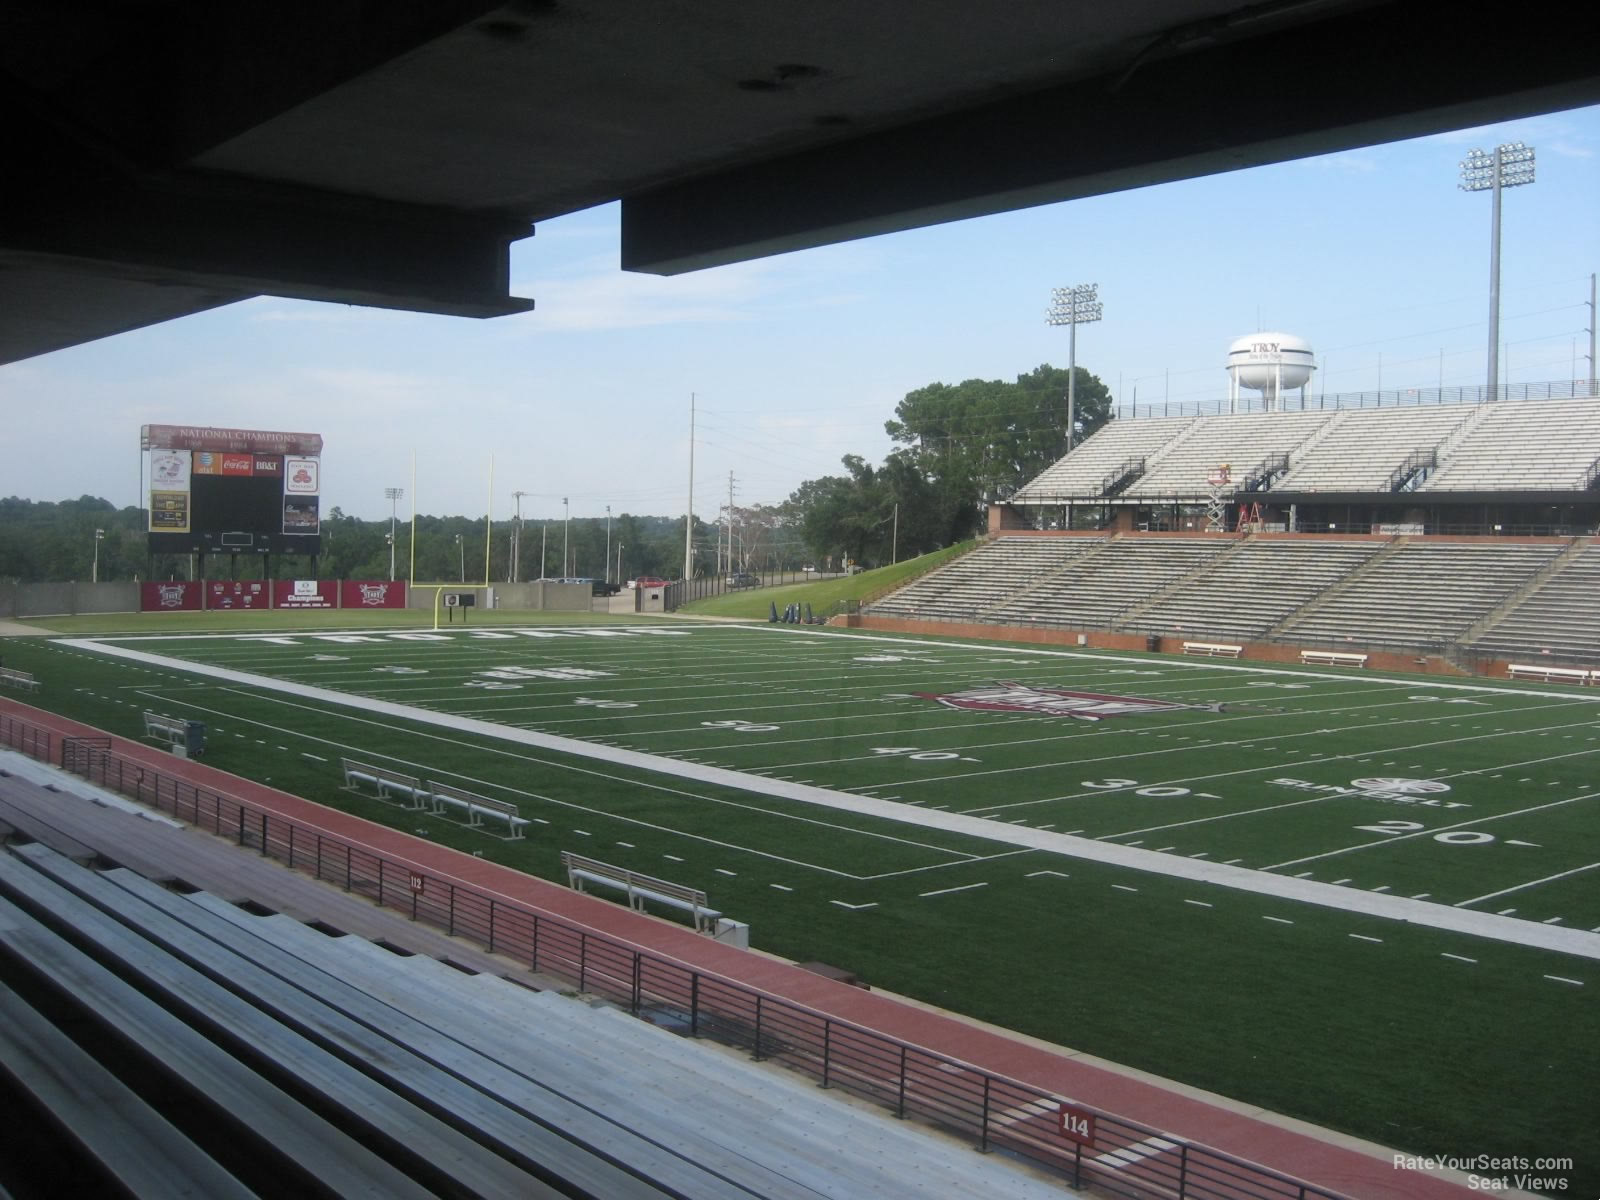 section 116, row 15 seat view  - troy memorial stadium